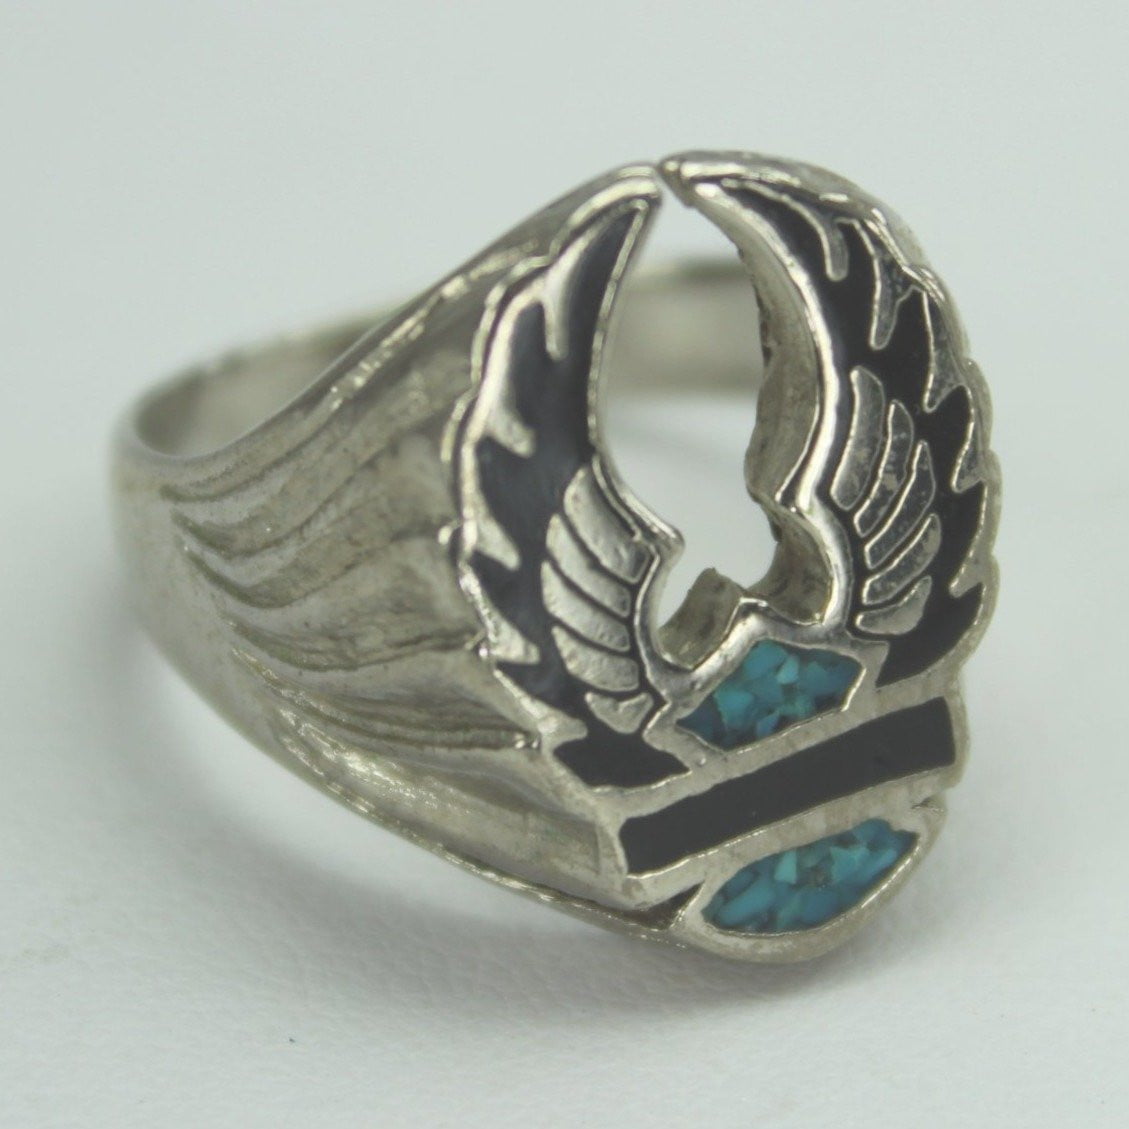 Older Harley Wings Ring Crushed Turquoise Black Inset Size 12  heavy